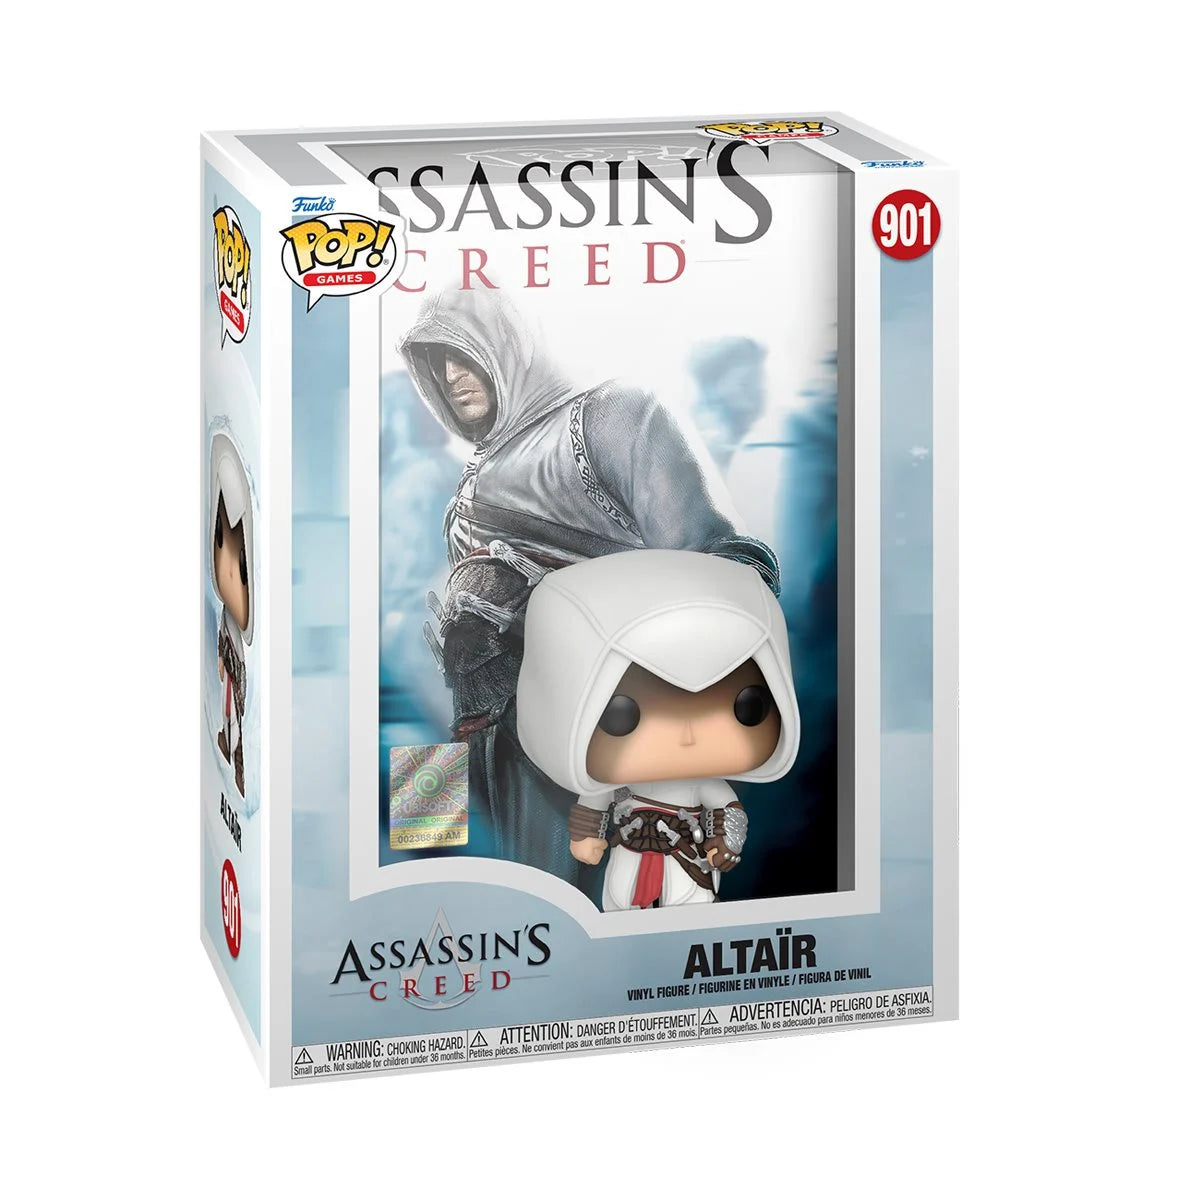 Altair Assassin's Creed Pop! Game Cover Figure with Case